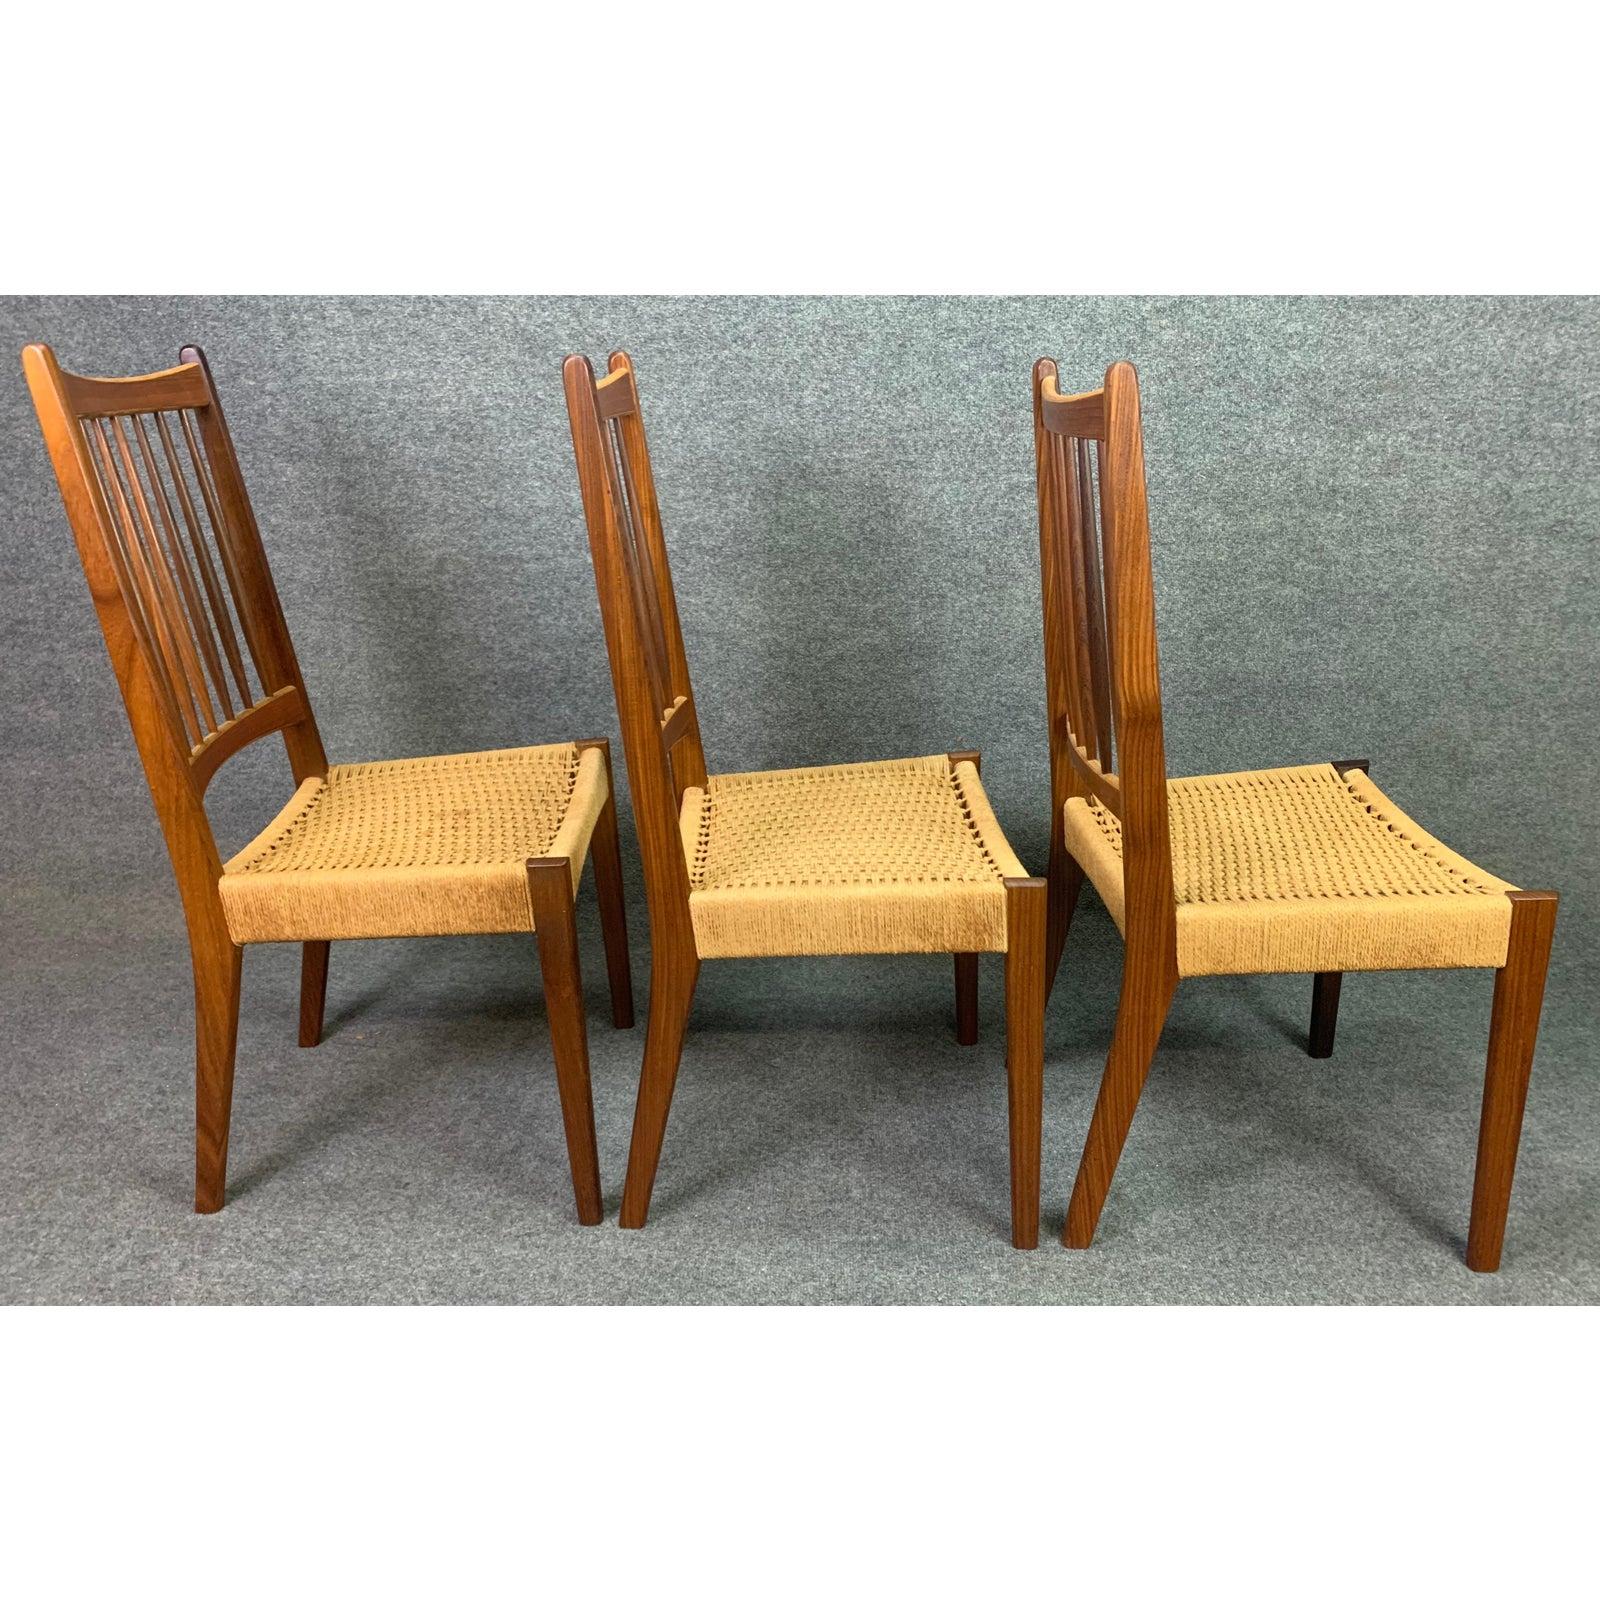 Woodwork Vintage Danish Mid-Century Modern Teak High Back Dining Chairs, Set of Six For Sale